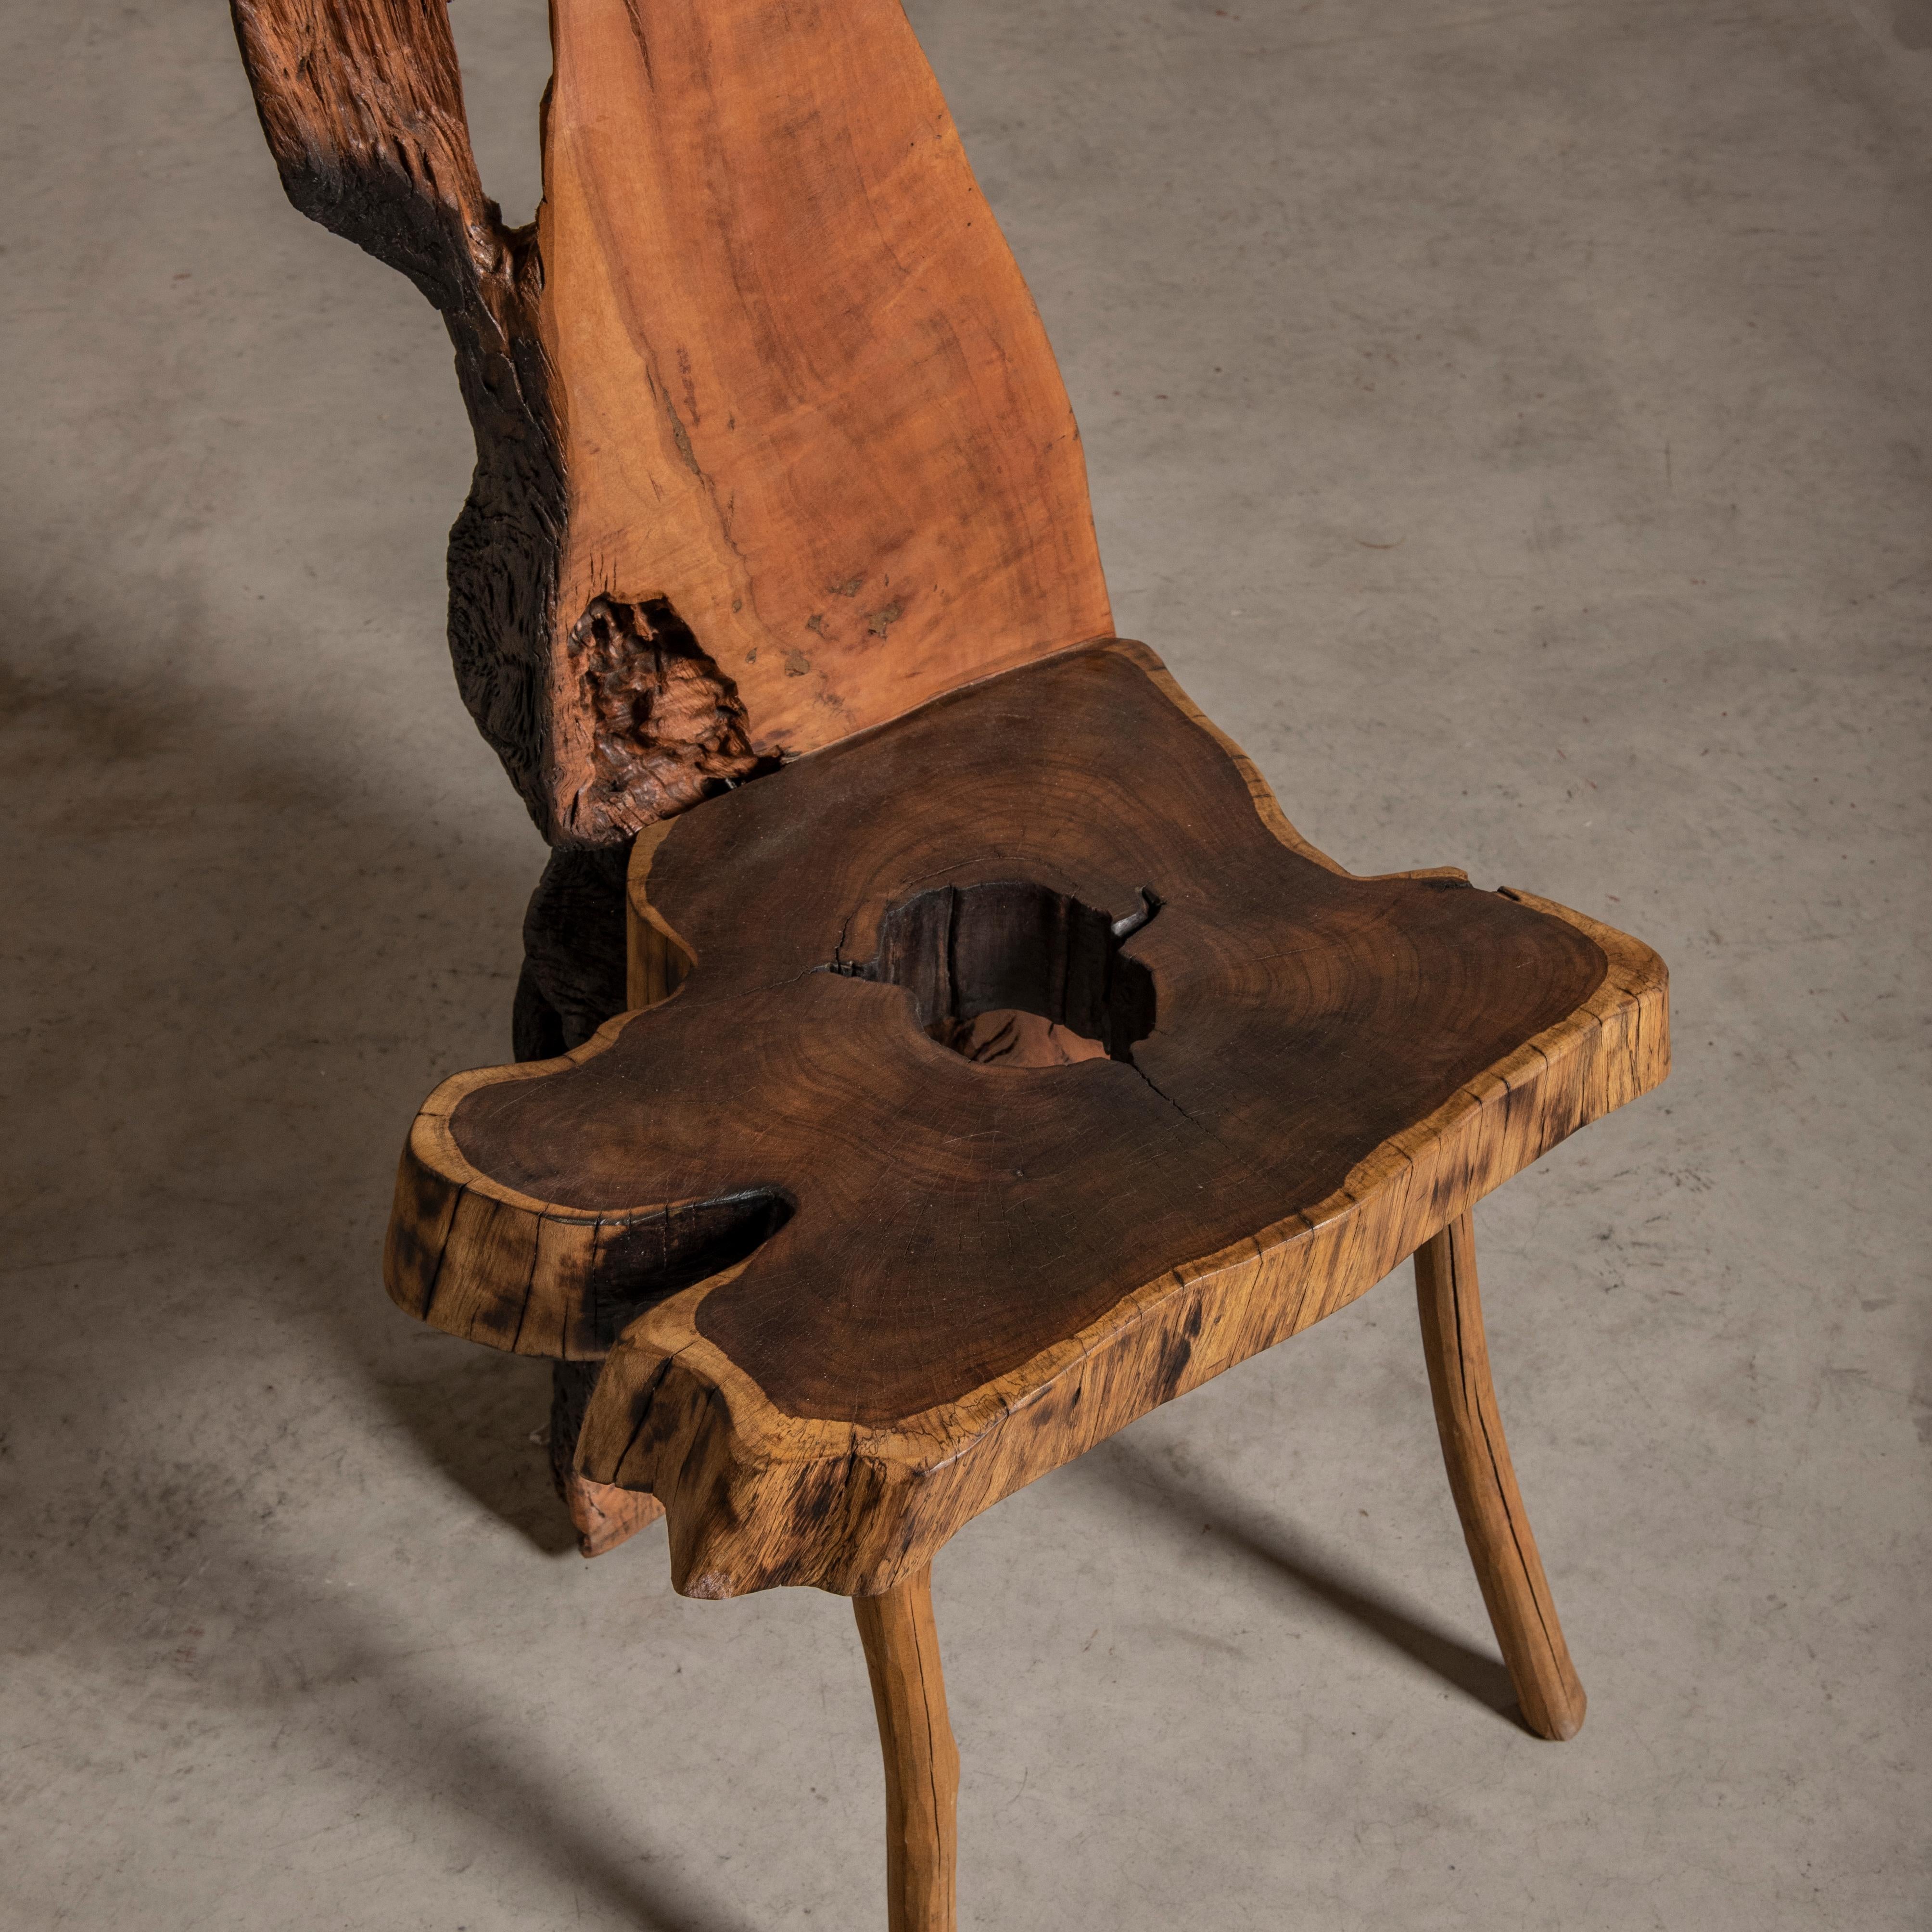 Immerse yourself in the enigmatic world of furniture artistry with this mesmerizing chair, crafted by the skilled hands of Nen Artesão. Blurring the boundaries between design art and vernacular furniture making, this chair stands as a true testament